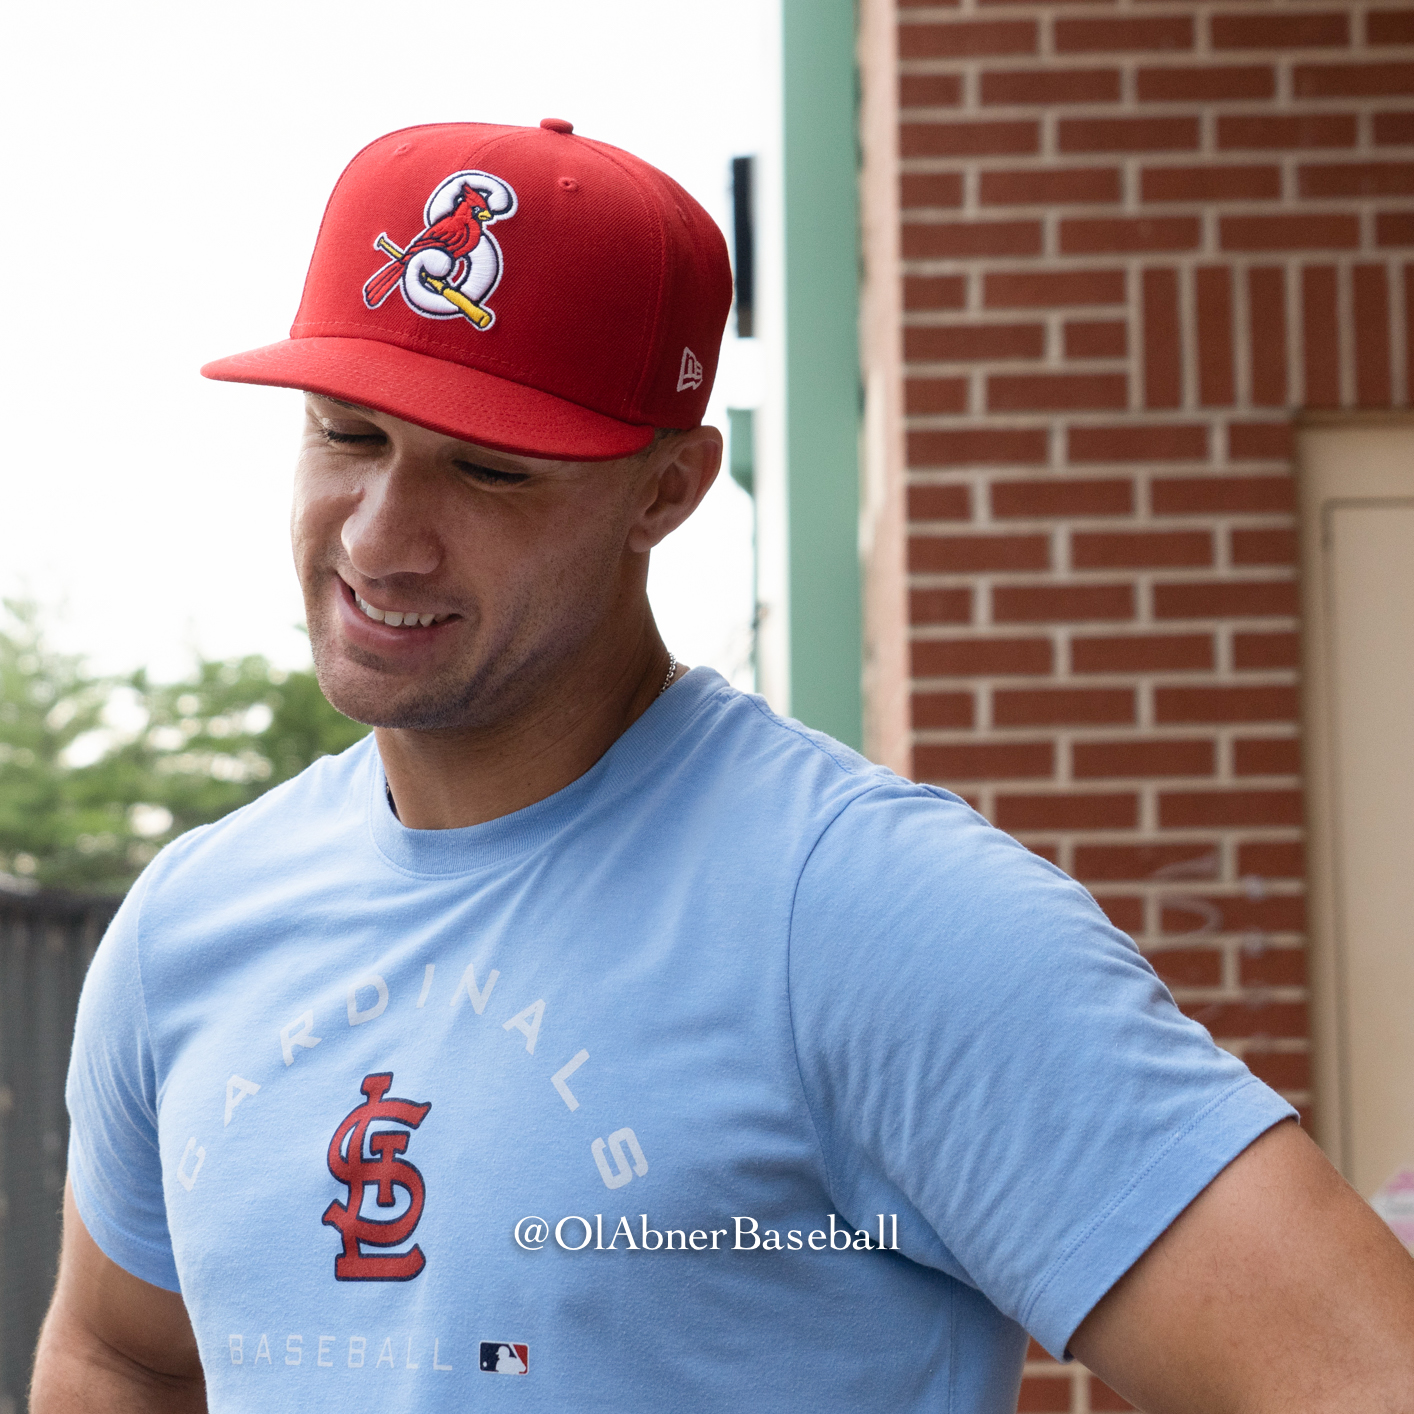 Jack Flaherty smiles after rehab start wearing Cardinals shirt and hat